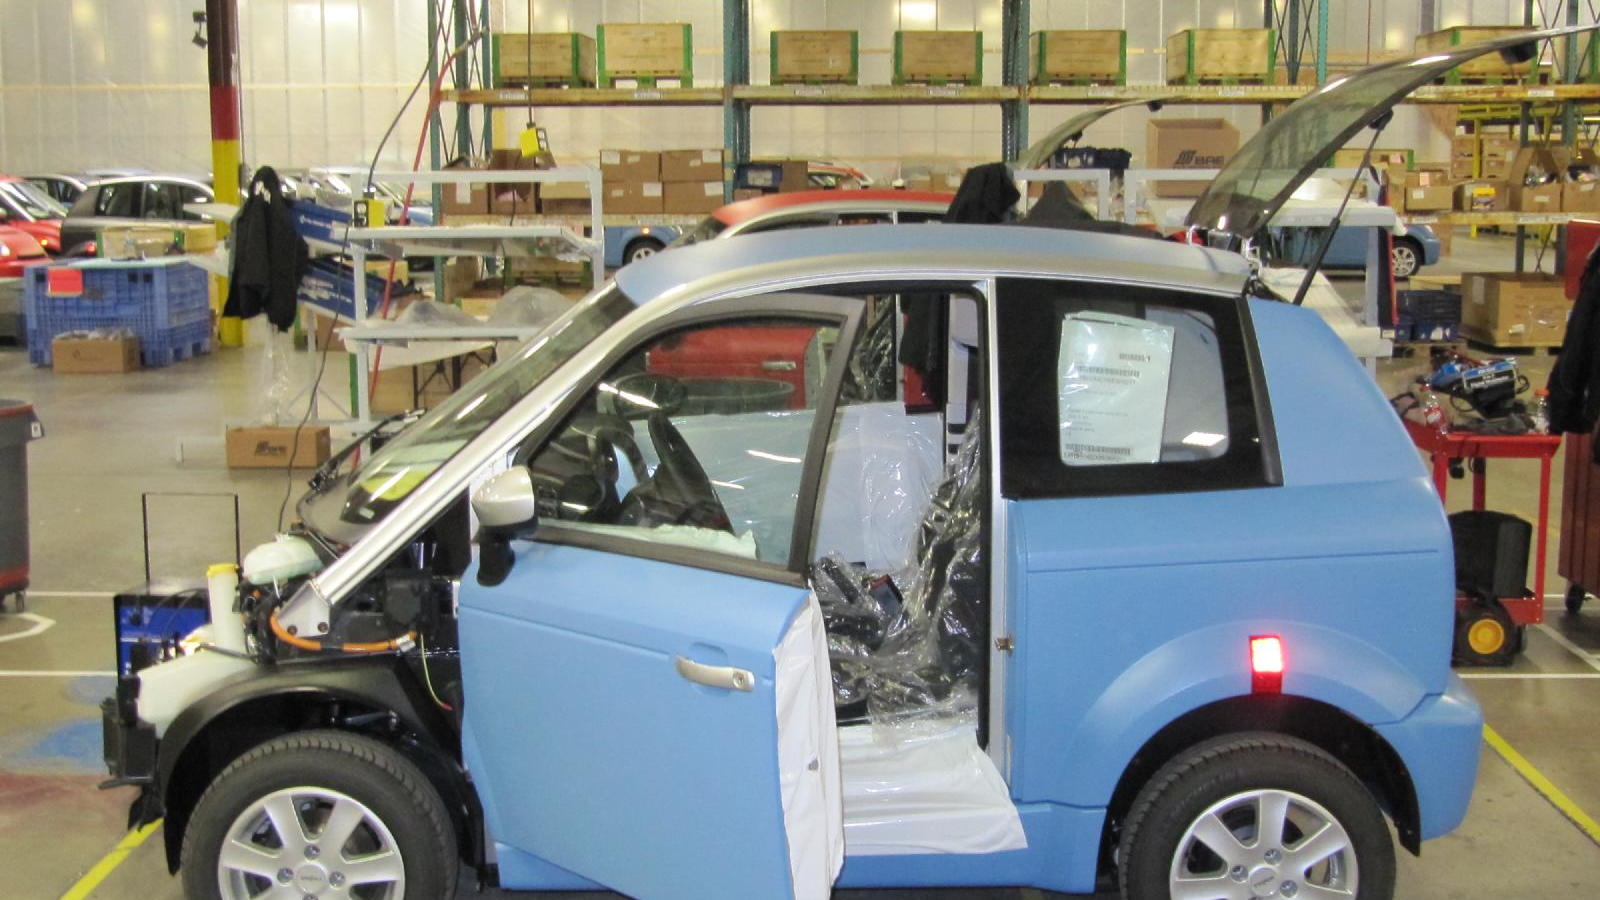 Assembly of Think City electric cars, Elkhart, Indiana, Jan 2011